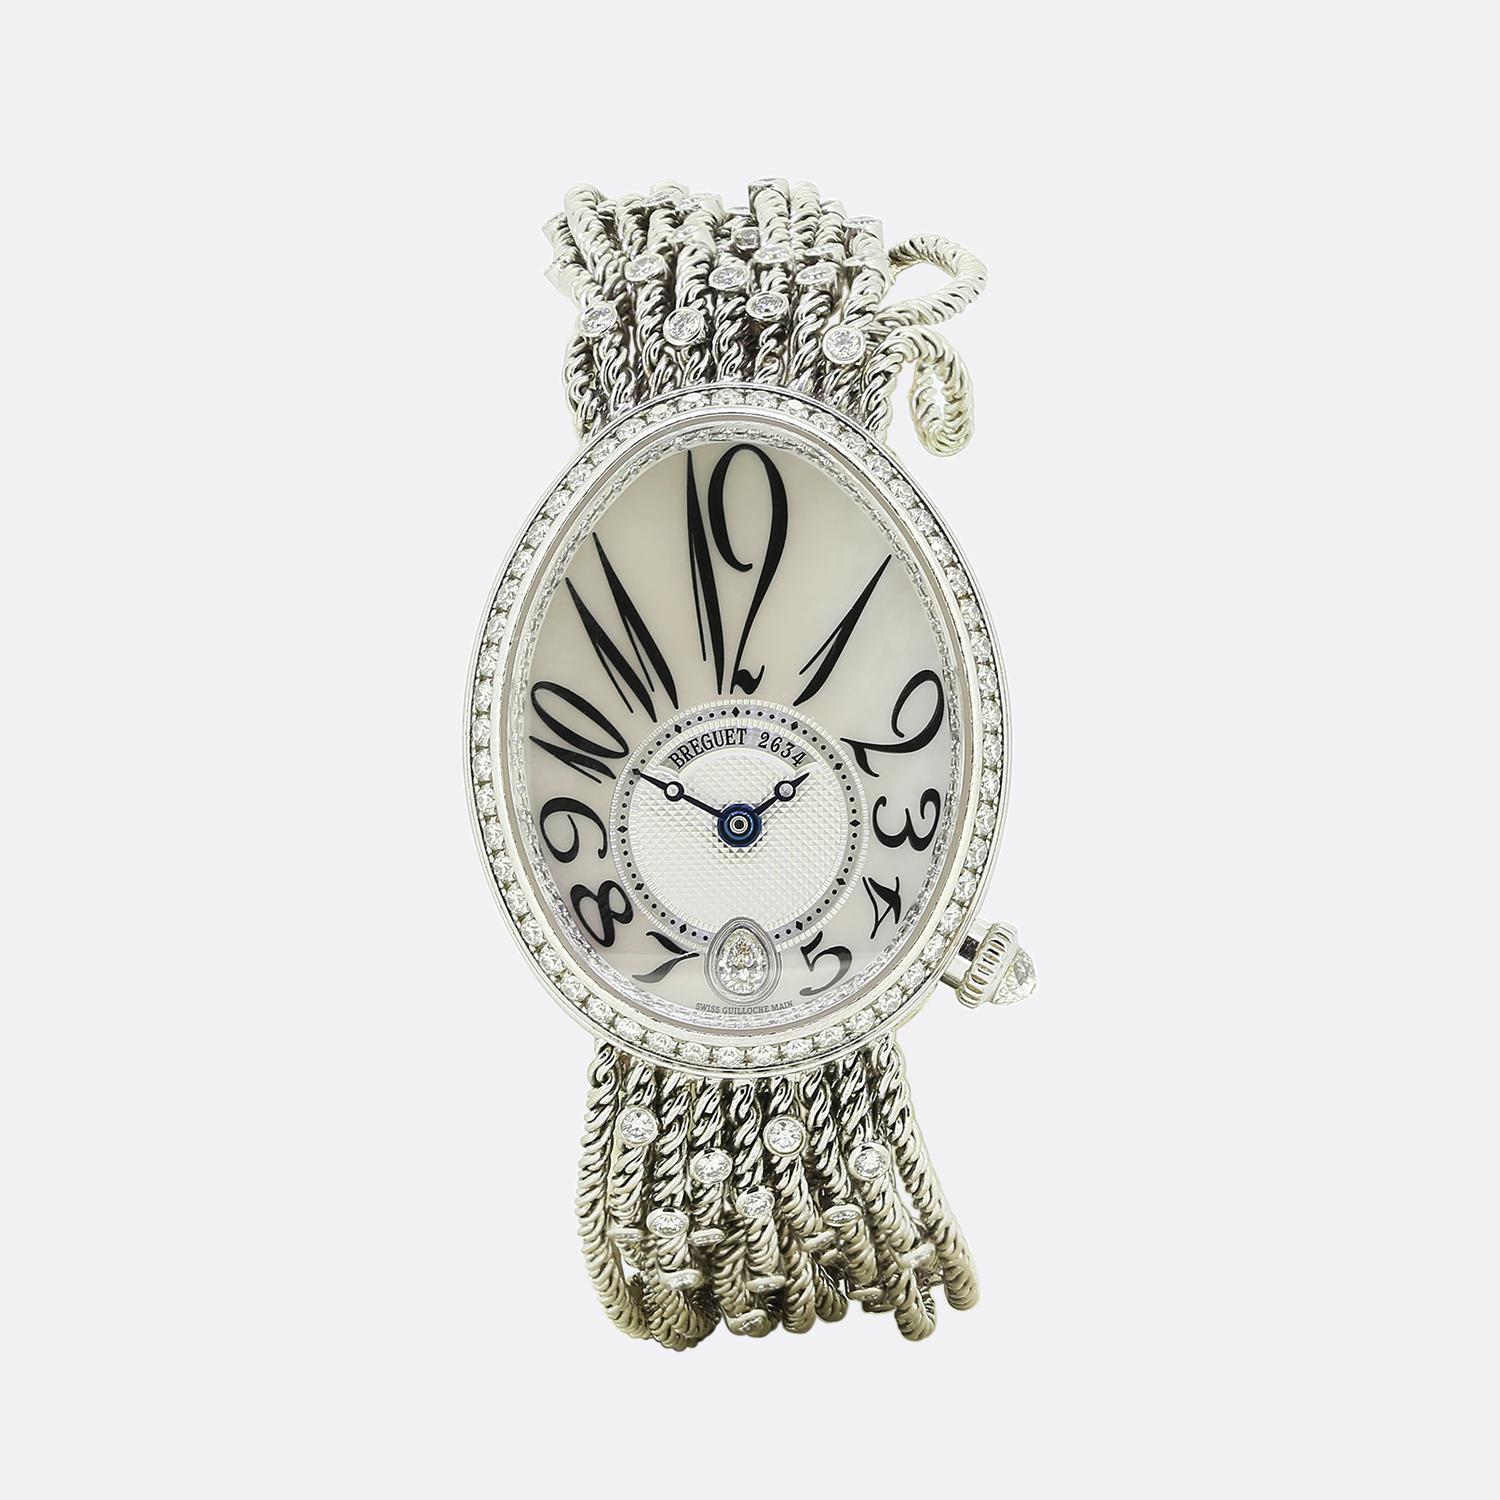 This is a stunning 18k white gold Breguet ‘Reine de Naples’ diamond wristwatch. The watch features a mother of pearl dial and a sub dial in 18k white gold with a fine guilloche textured pattern,black printed dot minute track and blue steel Breguet